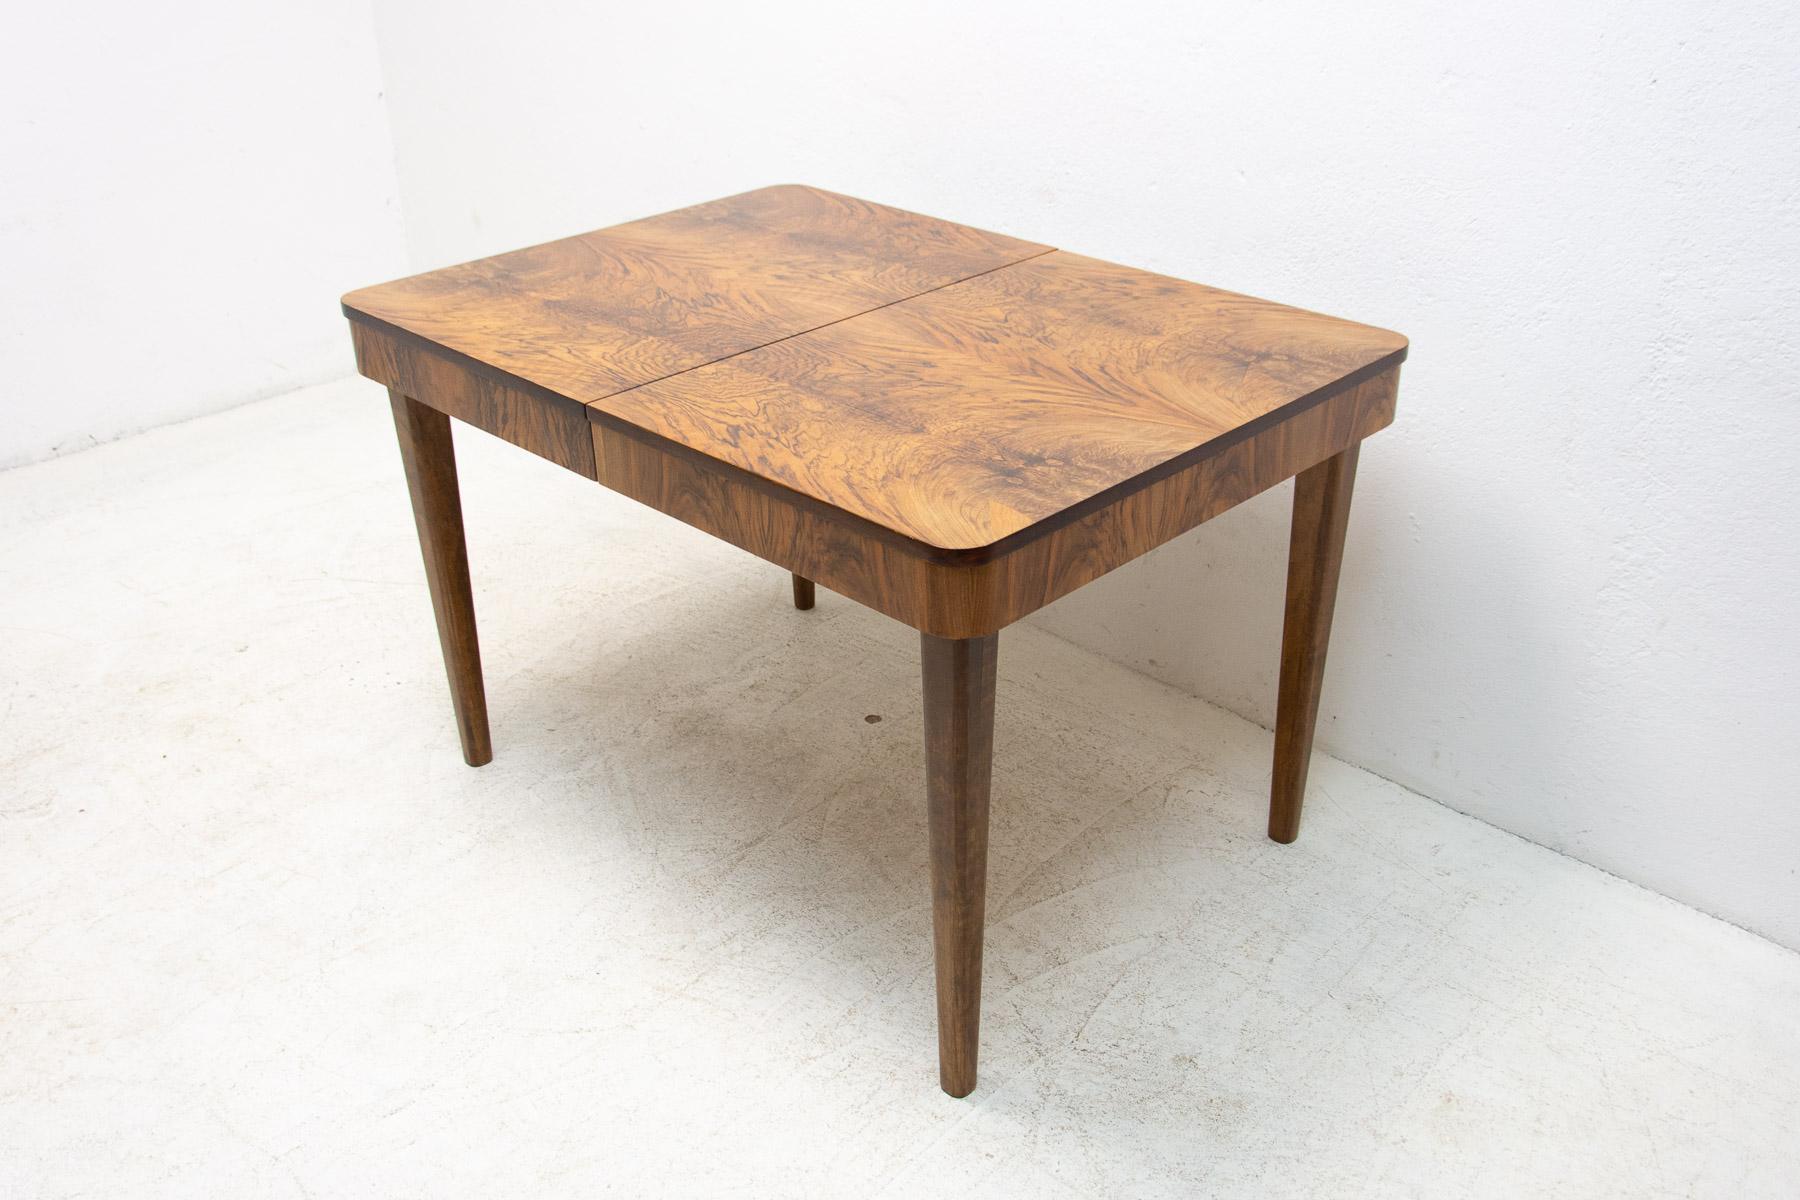 Czech Fully Renovated Adjustable Walnut Dining Table by Jindrich Halabala, 1940s For Sale